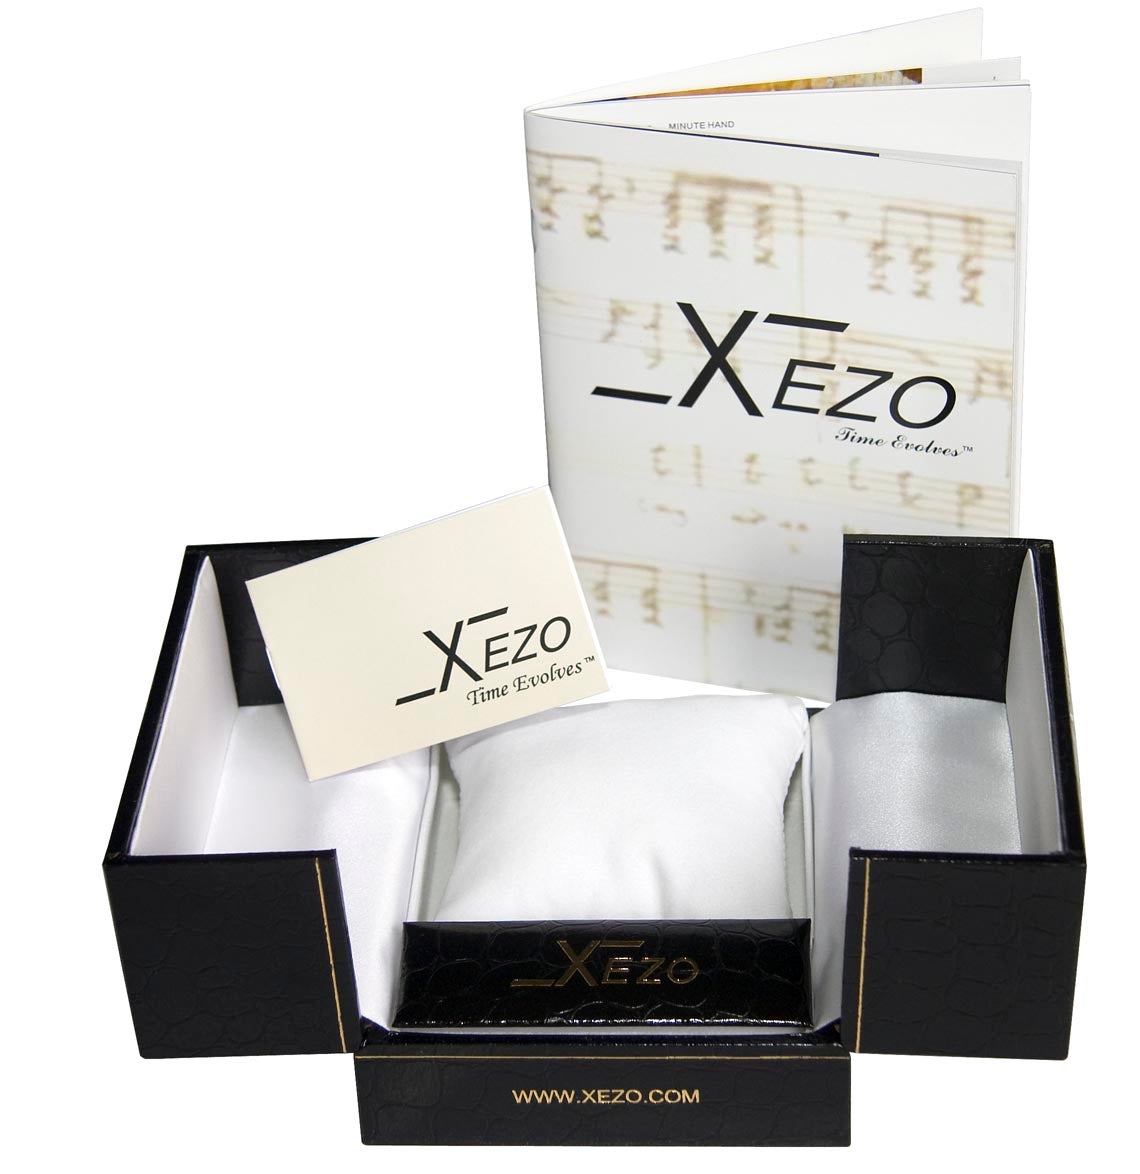 Xezo - Black gift box, certificate, and manual of the Air Commando D45-R watch